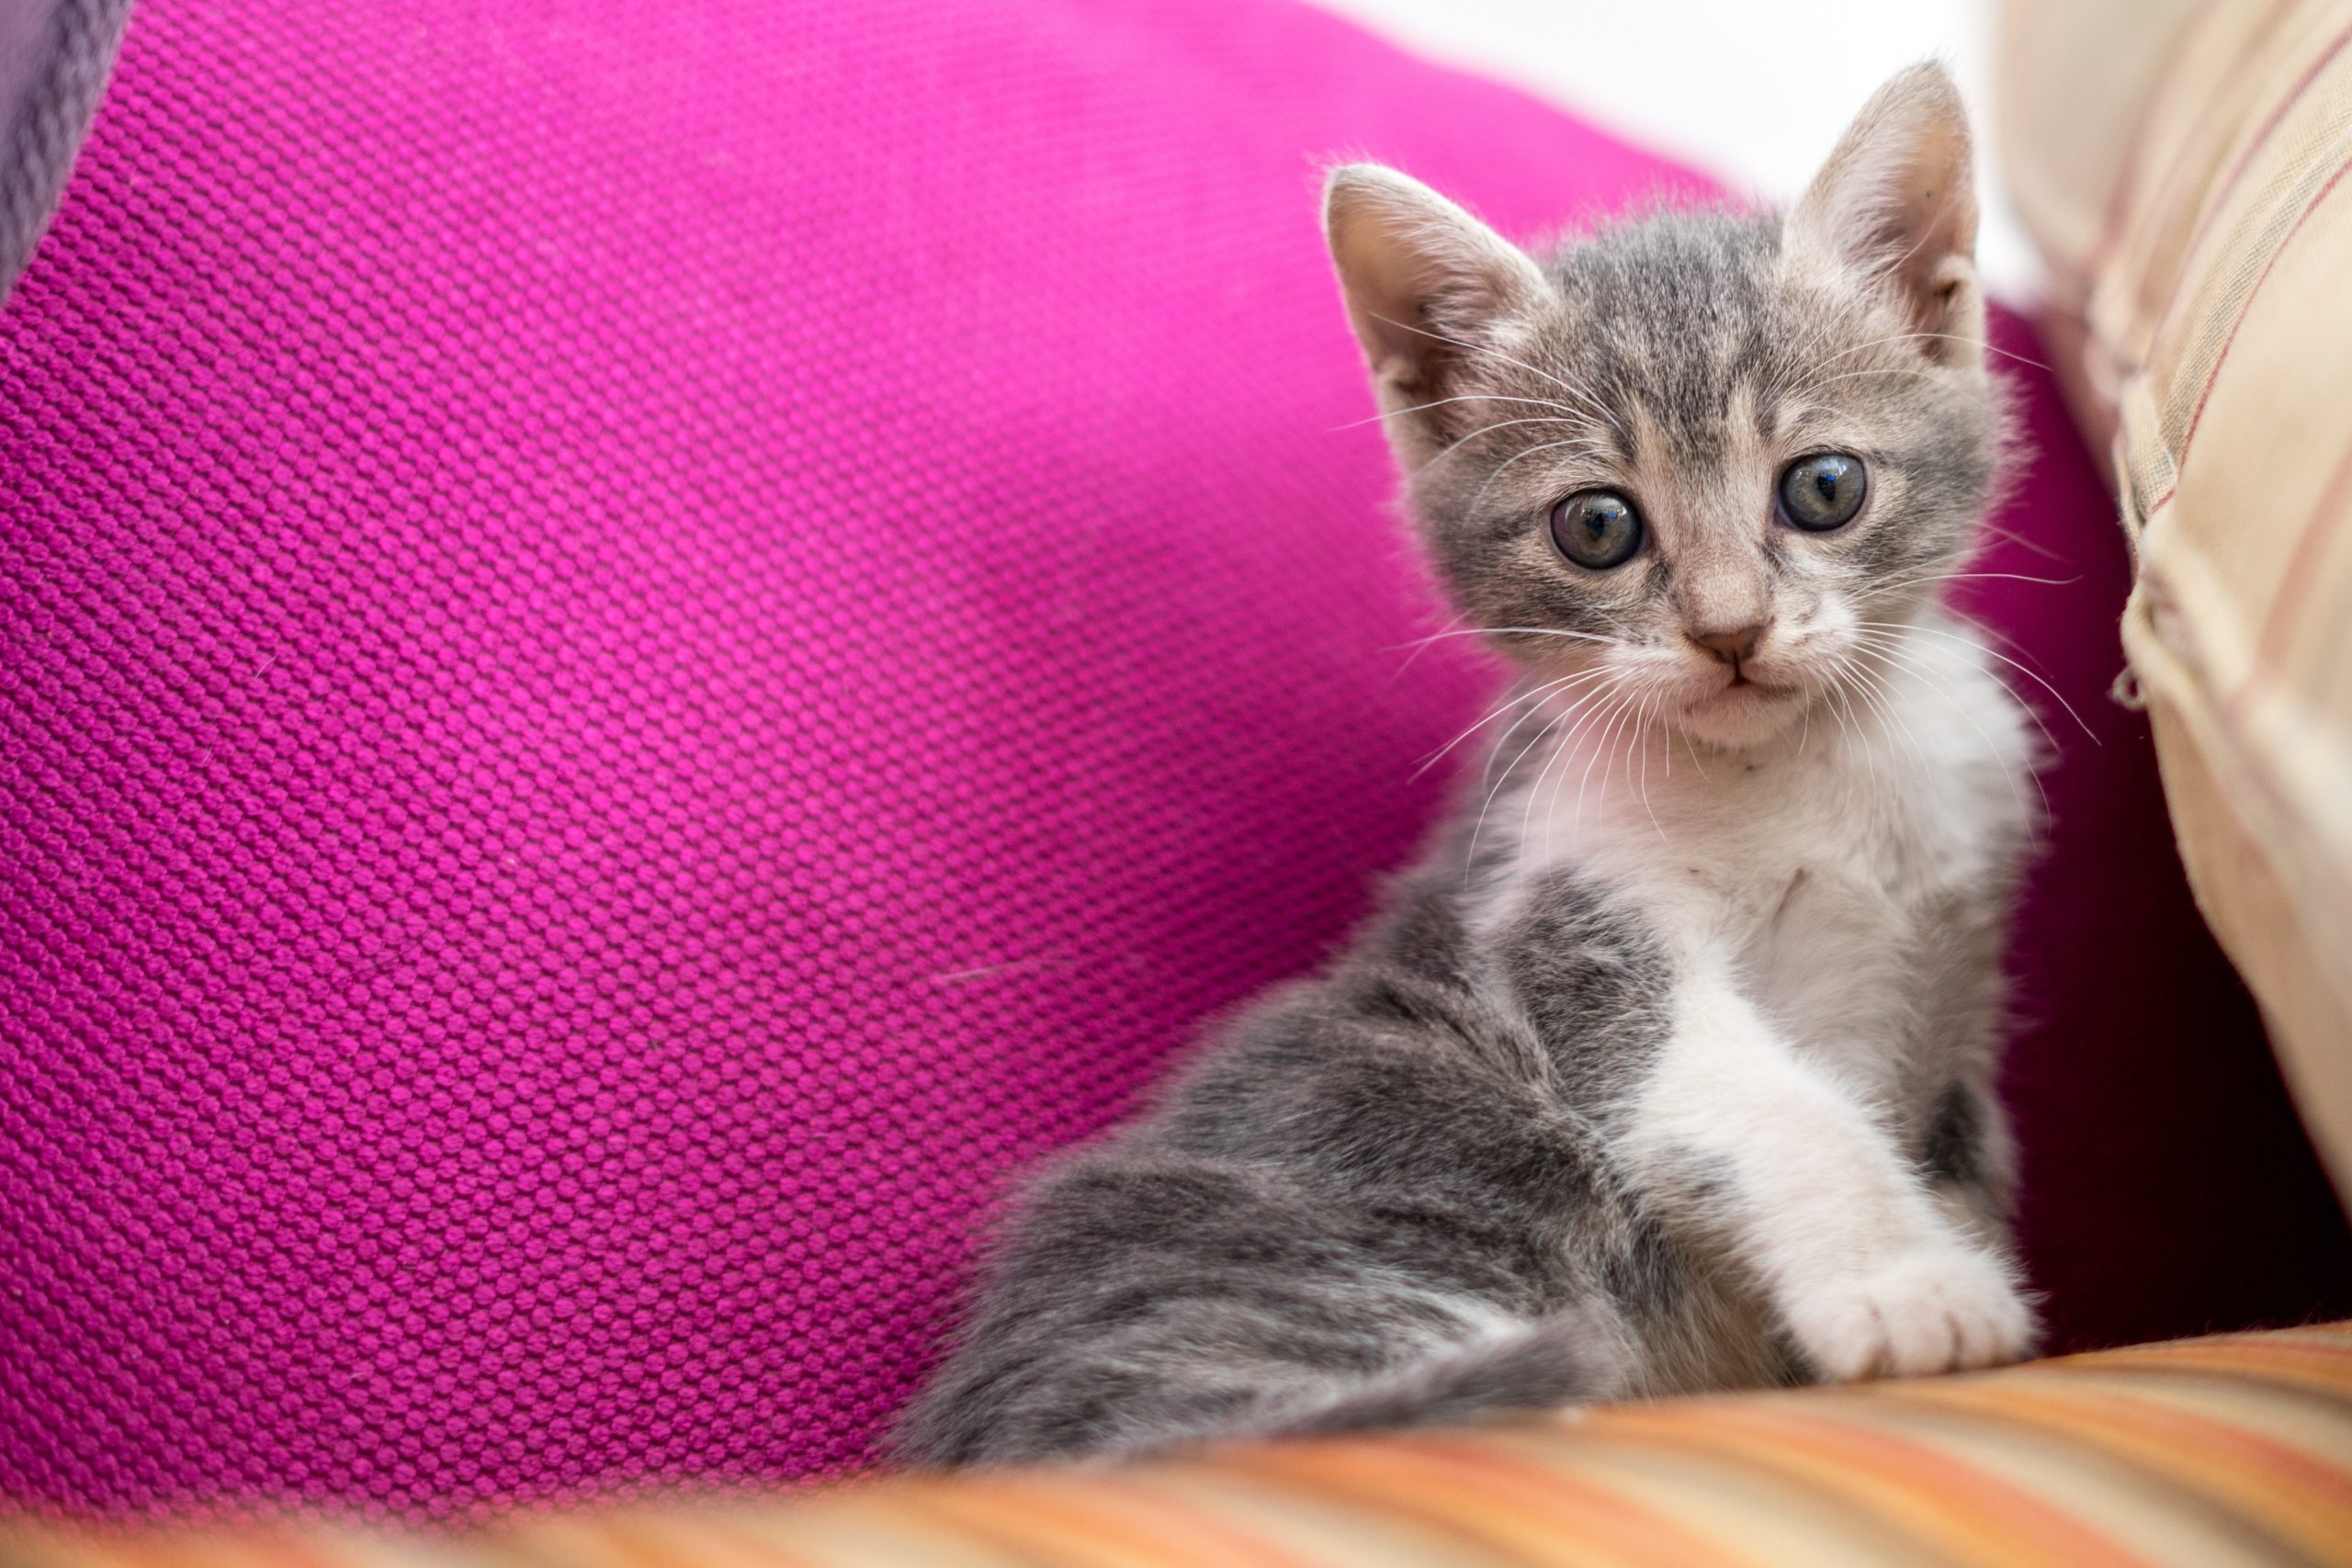 Many supplies such as food, water, litter, bedding and toys are essential when bringing home a new kitten.